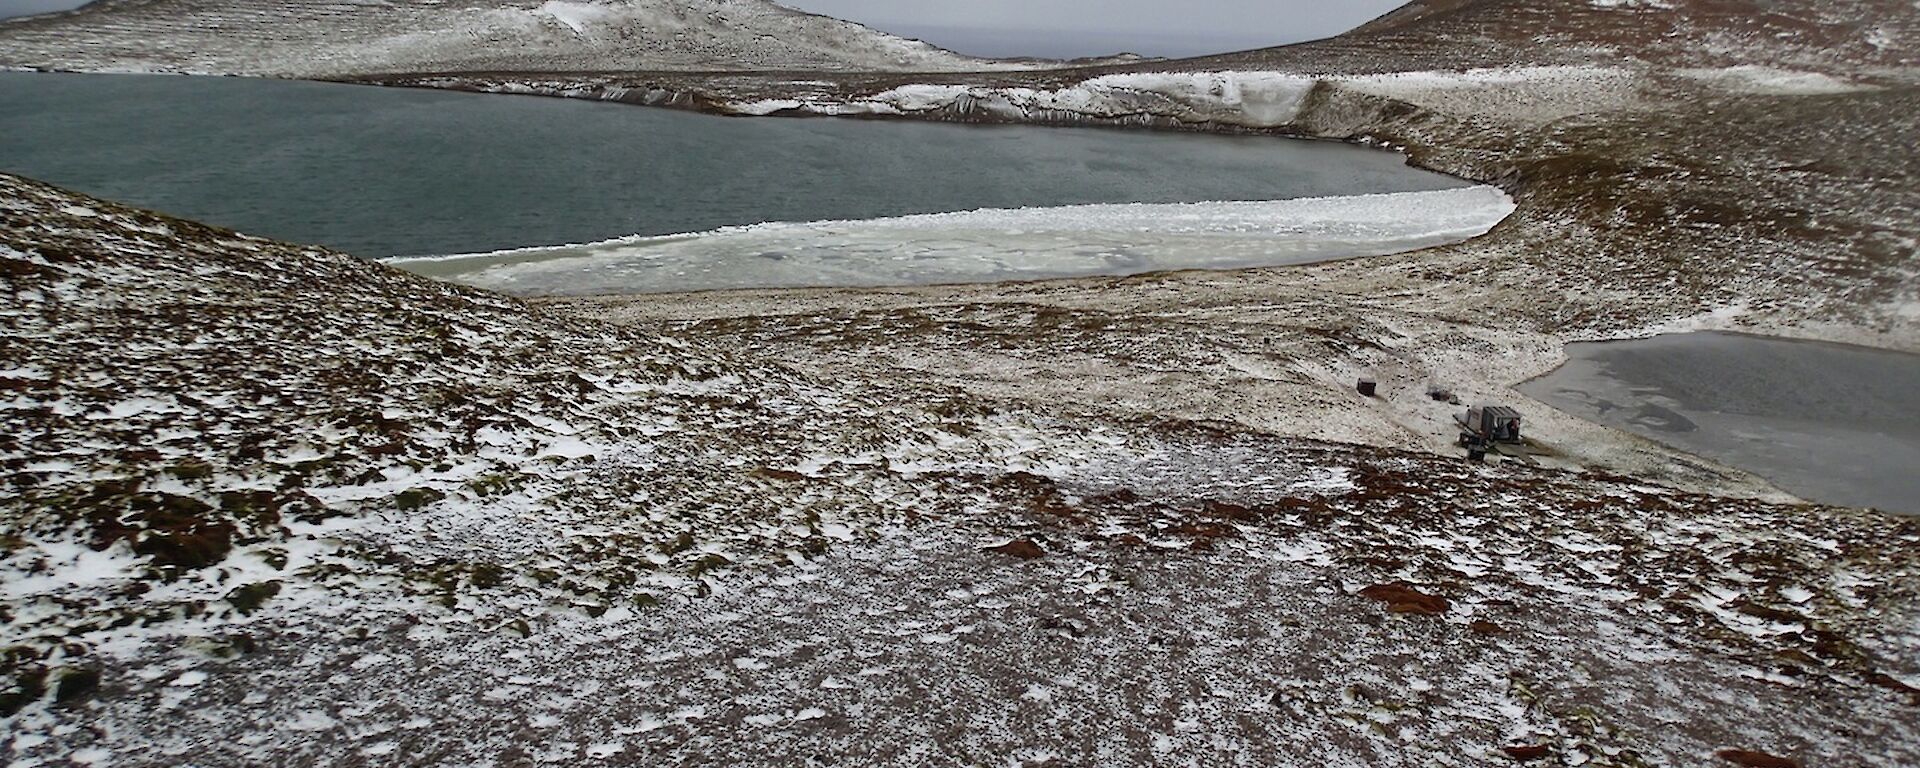 Frozen lakes near Windy Ridge — taken from a high vantage points shows a snow covered landscape with some hills in the background a partially frozen lake on the left and a smaller lake on the right. Windy Ridge hut is near the shore of the smaller lake